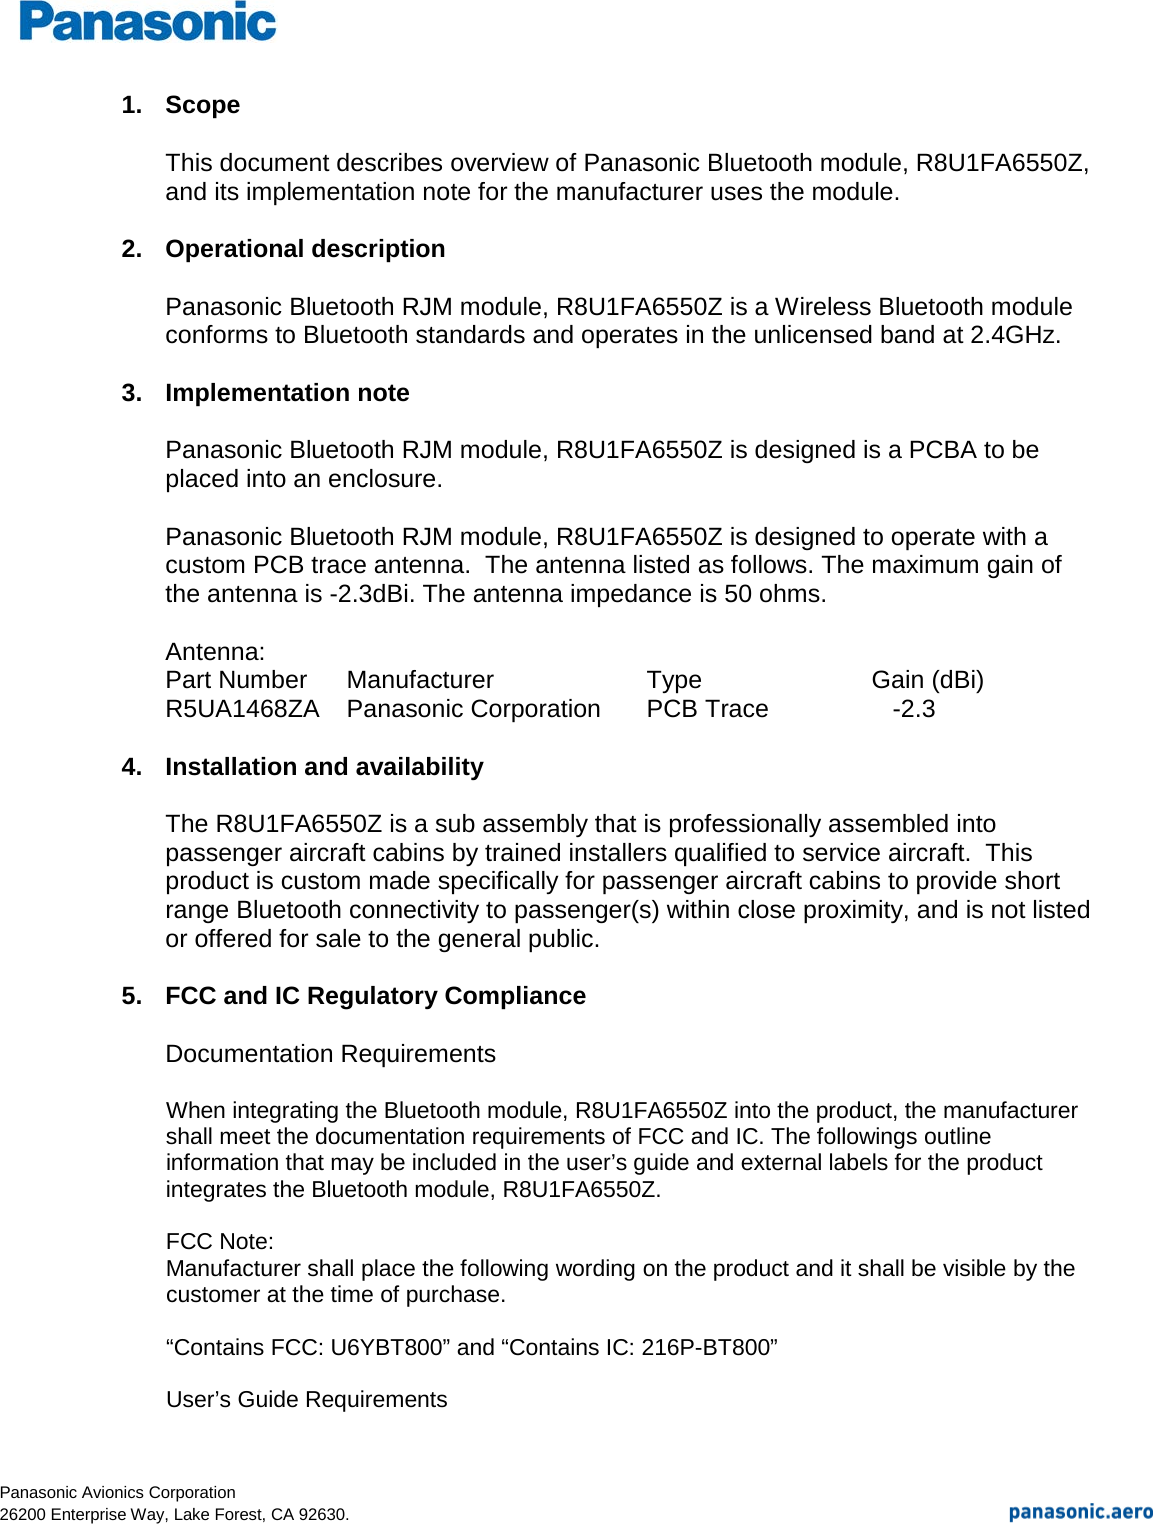  Panasonic Avionics Corporation                                                                                                                                                    26200 Enterprise Way, Lake Forest, CA 92630. 1. Scope  This document describes overview of Panasonic Bluetooth module, R8U1FA6550Z, and its implementation note for the manufacturer uses the module.  2. Operational description  Panasonic Bluetooth RJM module, R8U1FA6550Z is a Wireless Bluetooth module conforms to Bluetooth standards and operates in the unlicensed band at 2.4GHz.  3. Implementation note  Panasonic Bluetooth RJM module, R8U1FA6550Z is designed is a PCBA to be placed into an enclosure.   Panasonic Bluetooth RJM module, R8U1FA6550Z is designed to operate with a custom PCB trace antenna.  The antenna listed as follows. The maximum gain of the antenna is -2.3dBi. The antenna impedance is 50 ohms.  Antenna: Part Number Manufacturer   Type   Gain (dBi) R5UA1468ZA Panasonic Corporation PCB Trace       -2.3  4. Installation and availability  The R8U1FA6550Z is a sub assembly that is professionally assembled into passenger aircraft cabins by trained installers qualified to service aircraft.  This product is custom made specifically for passenger aircraft cabins to provide short range Bluetooth connectivity to passenger(s) within close proximity, and is not listed or offered for sale to the general public.  5. FCC and IC Regulatory Compliance  Documentation Requirements  When integrating the Bluetooth module, R8U1FA6550Z into the product, the manufacturer shall meet the documentation requirements of FCC and IC. The followings outline information that may be included in the user’s guide and external labels for the product integrates the Bluetooth module, R8U1FA6550Z.   FCC Note: Manufacturer shall place the following wording on the product and it shall be visible by the customer at the time of purchase.  “Contains FCC: U6YBT800” and “Contains IC: 216P-BT800”  User’s Guide Requirements  